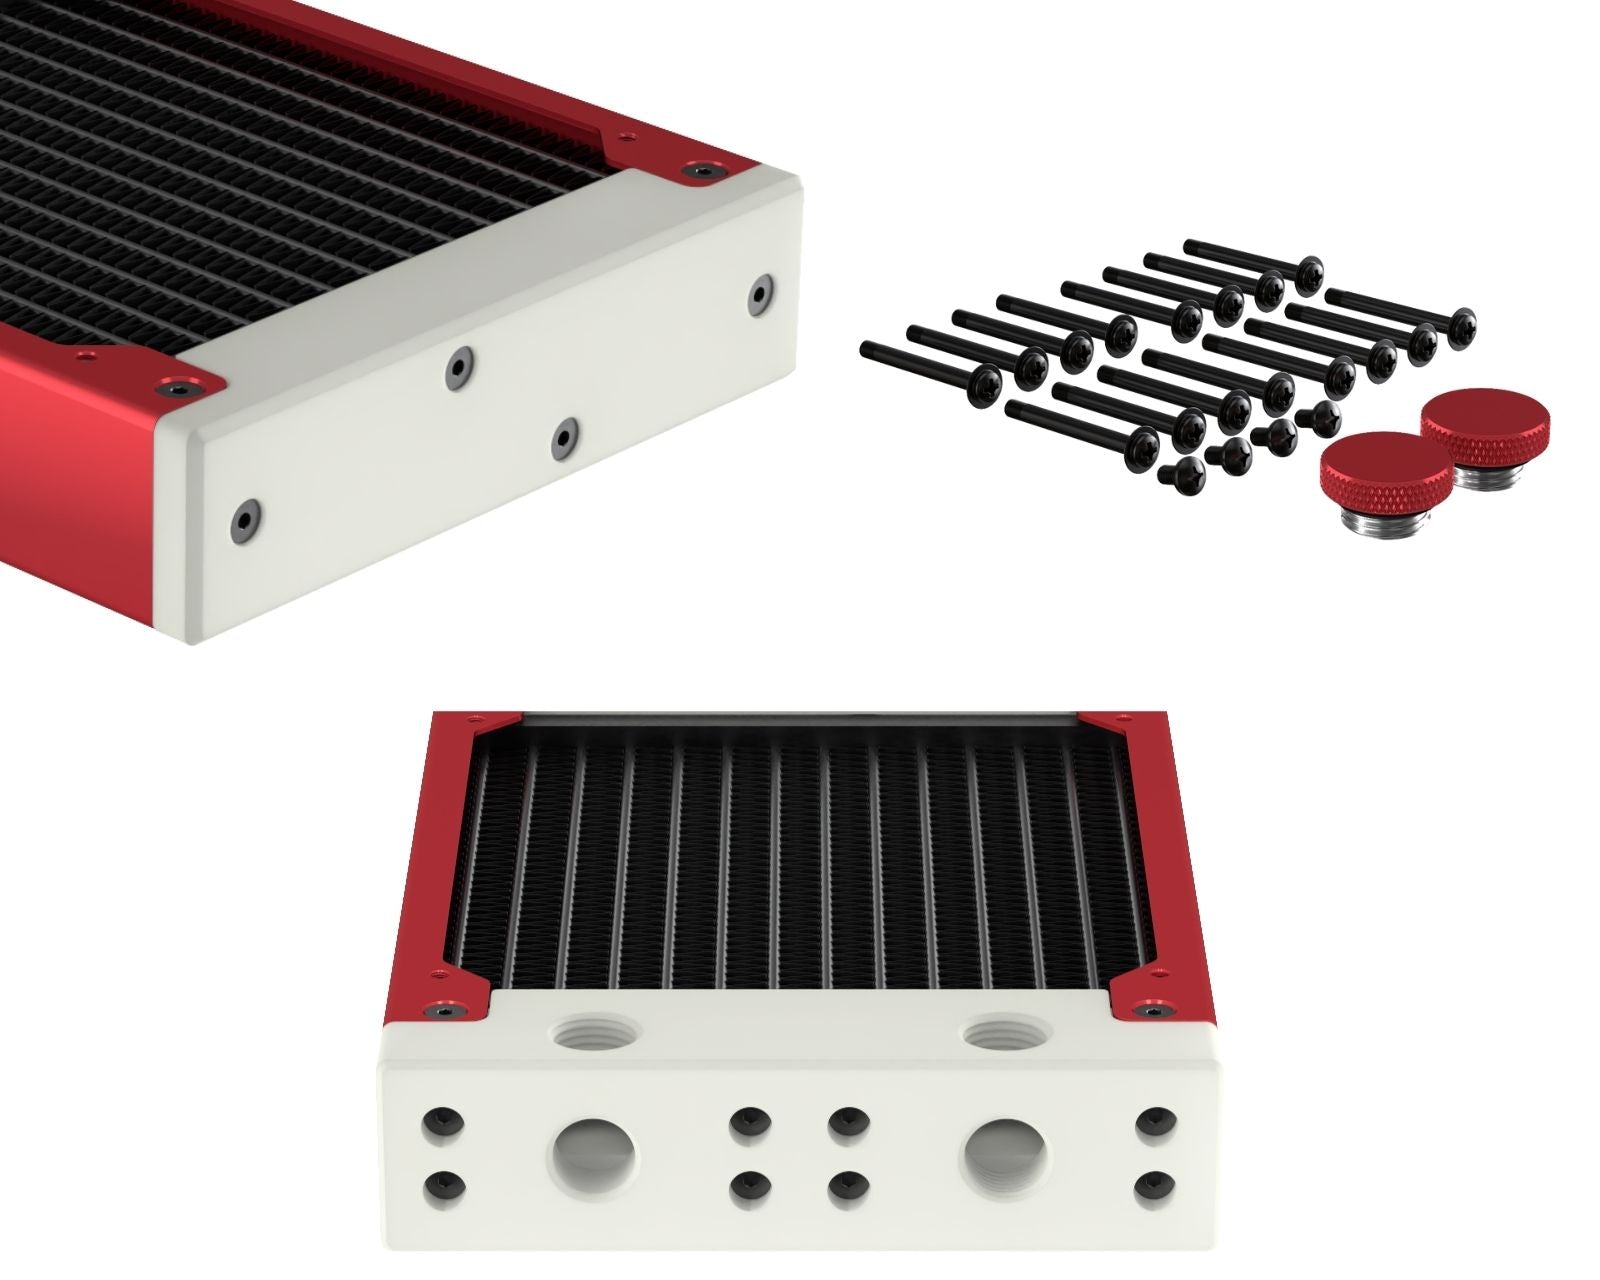 PrimoChill 480SL (30mm) EXIMO Modular Radiator, White POM, 4x120mm, Quad Fan (R-SL-W48) Available in 20+ Colors, Assembled in USA and Custom Watercooling Loop Ready - Candy Red